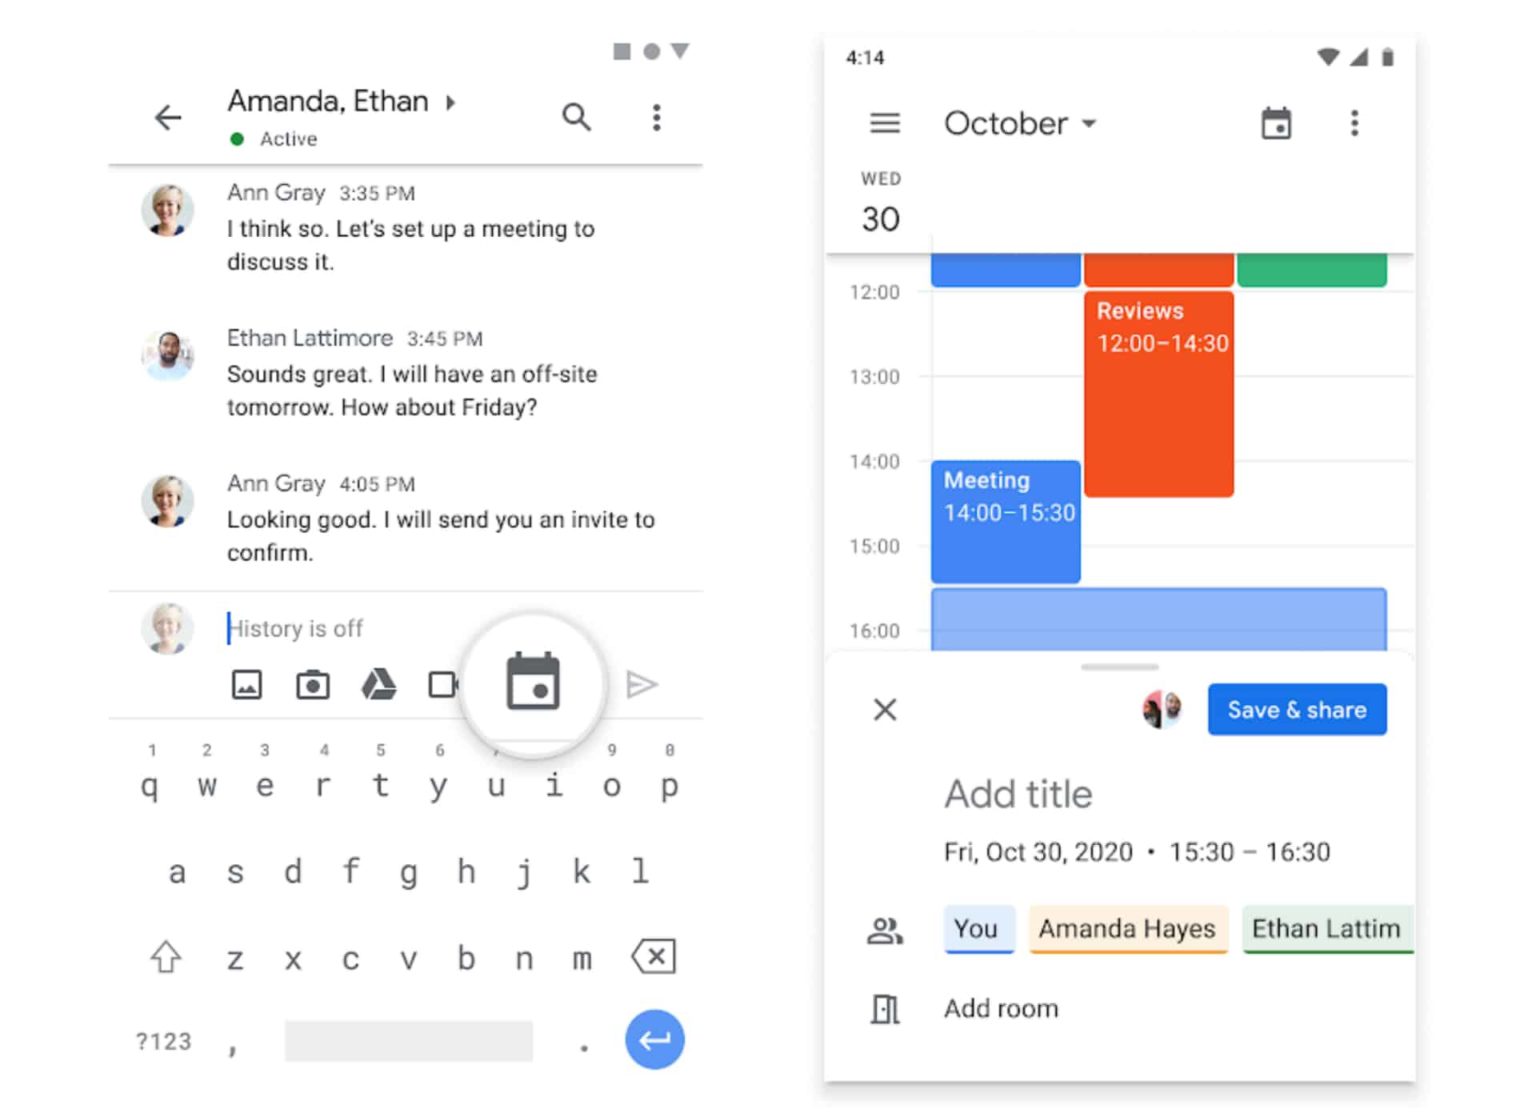 Google Chat Adds Shortcut for Calendar to Schedule Events Directly